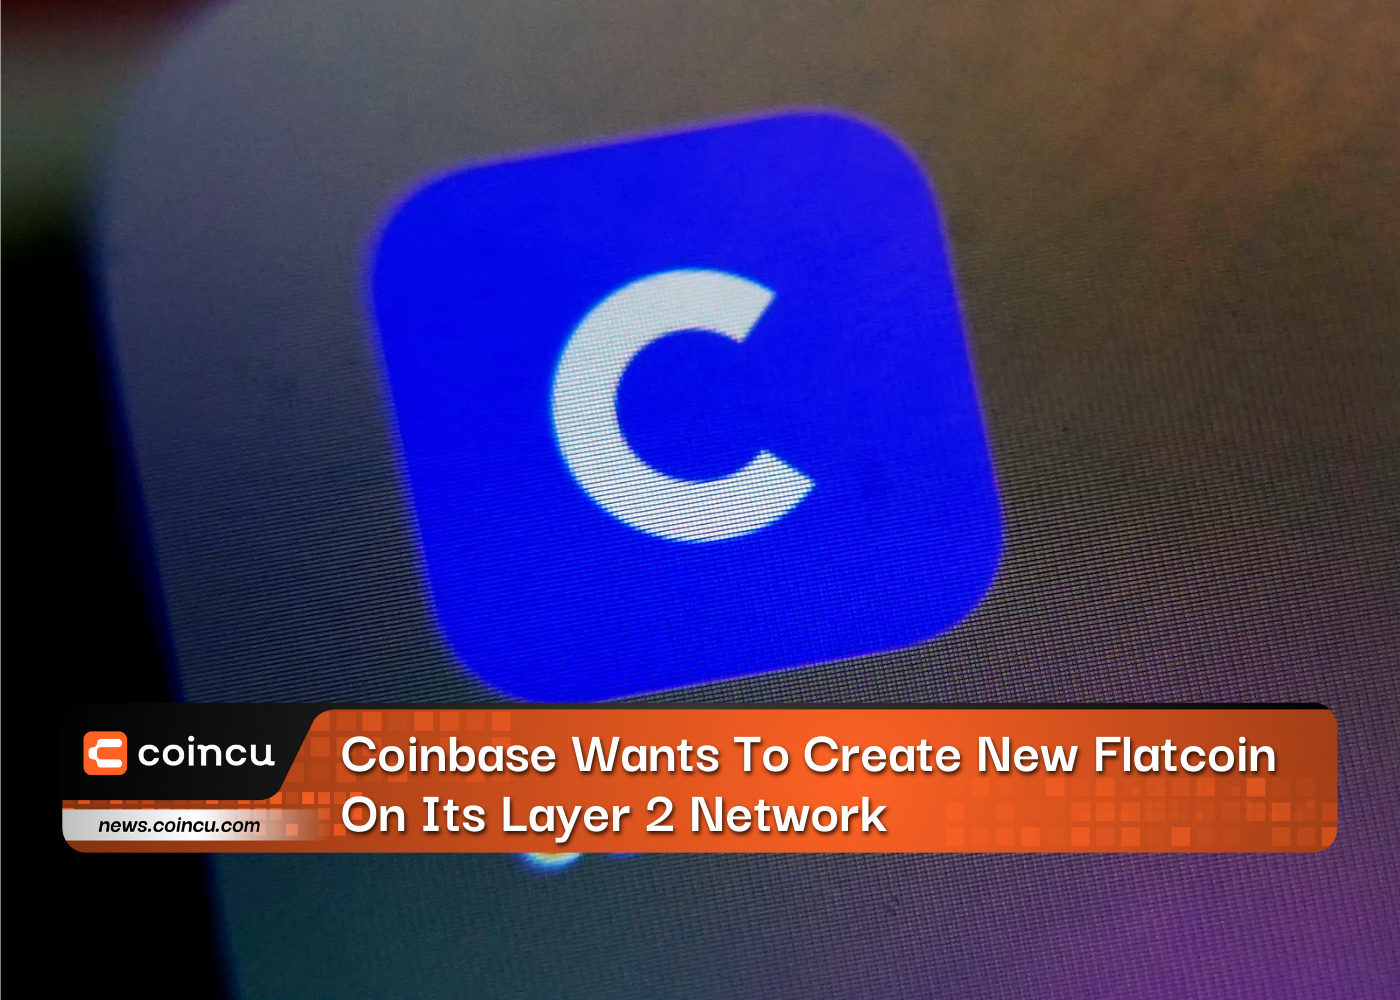 Coinbase Wants To Create New Flatcoin On Its Layer 2 Network